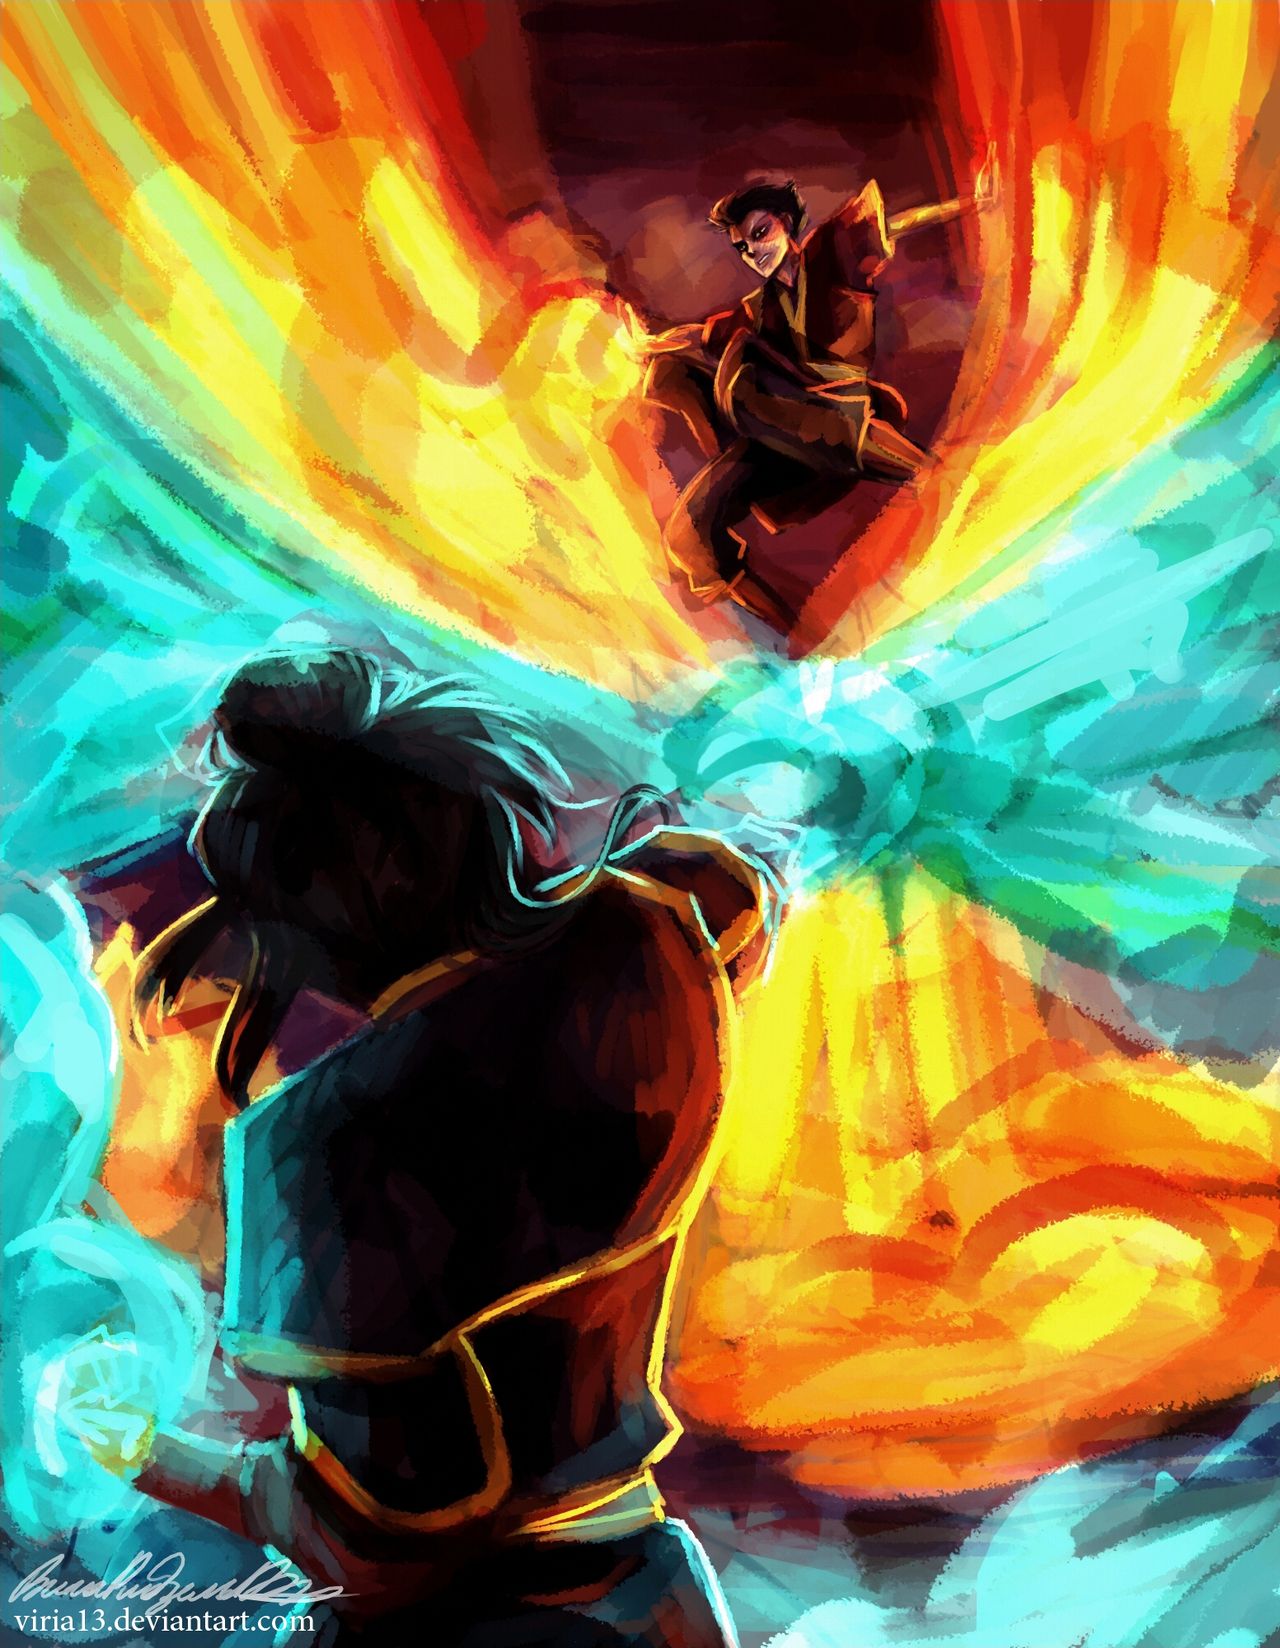 The showdown that was always meant to be. Avatar: The Last Airbender / The Legend of Korra